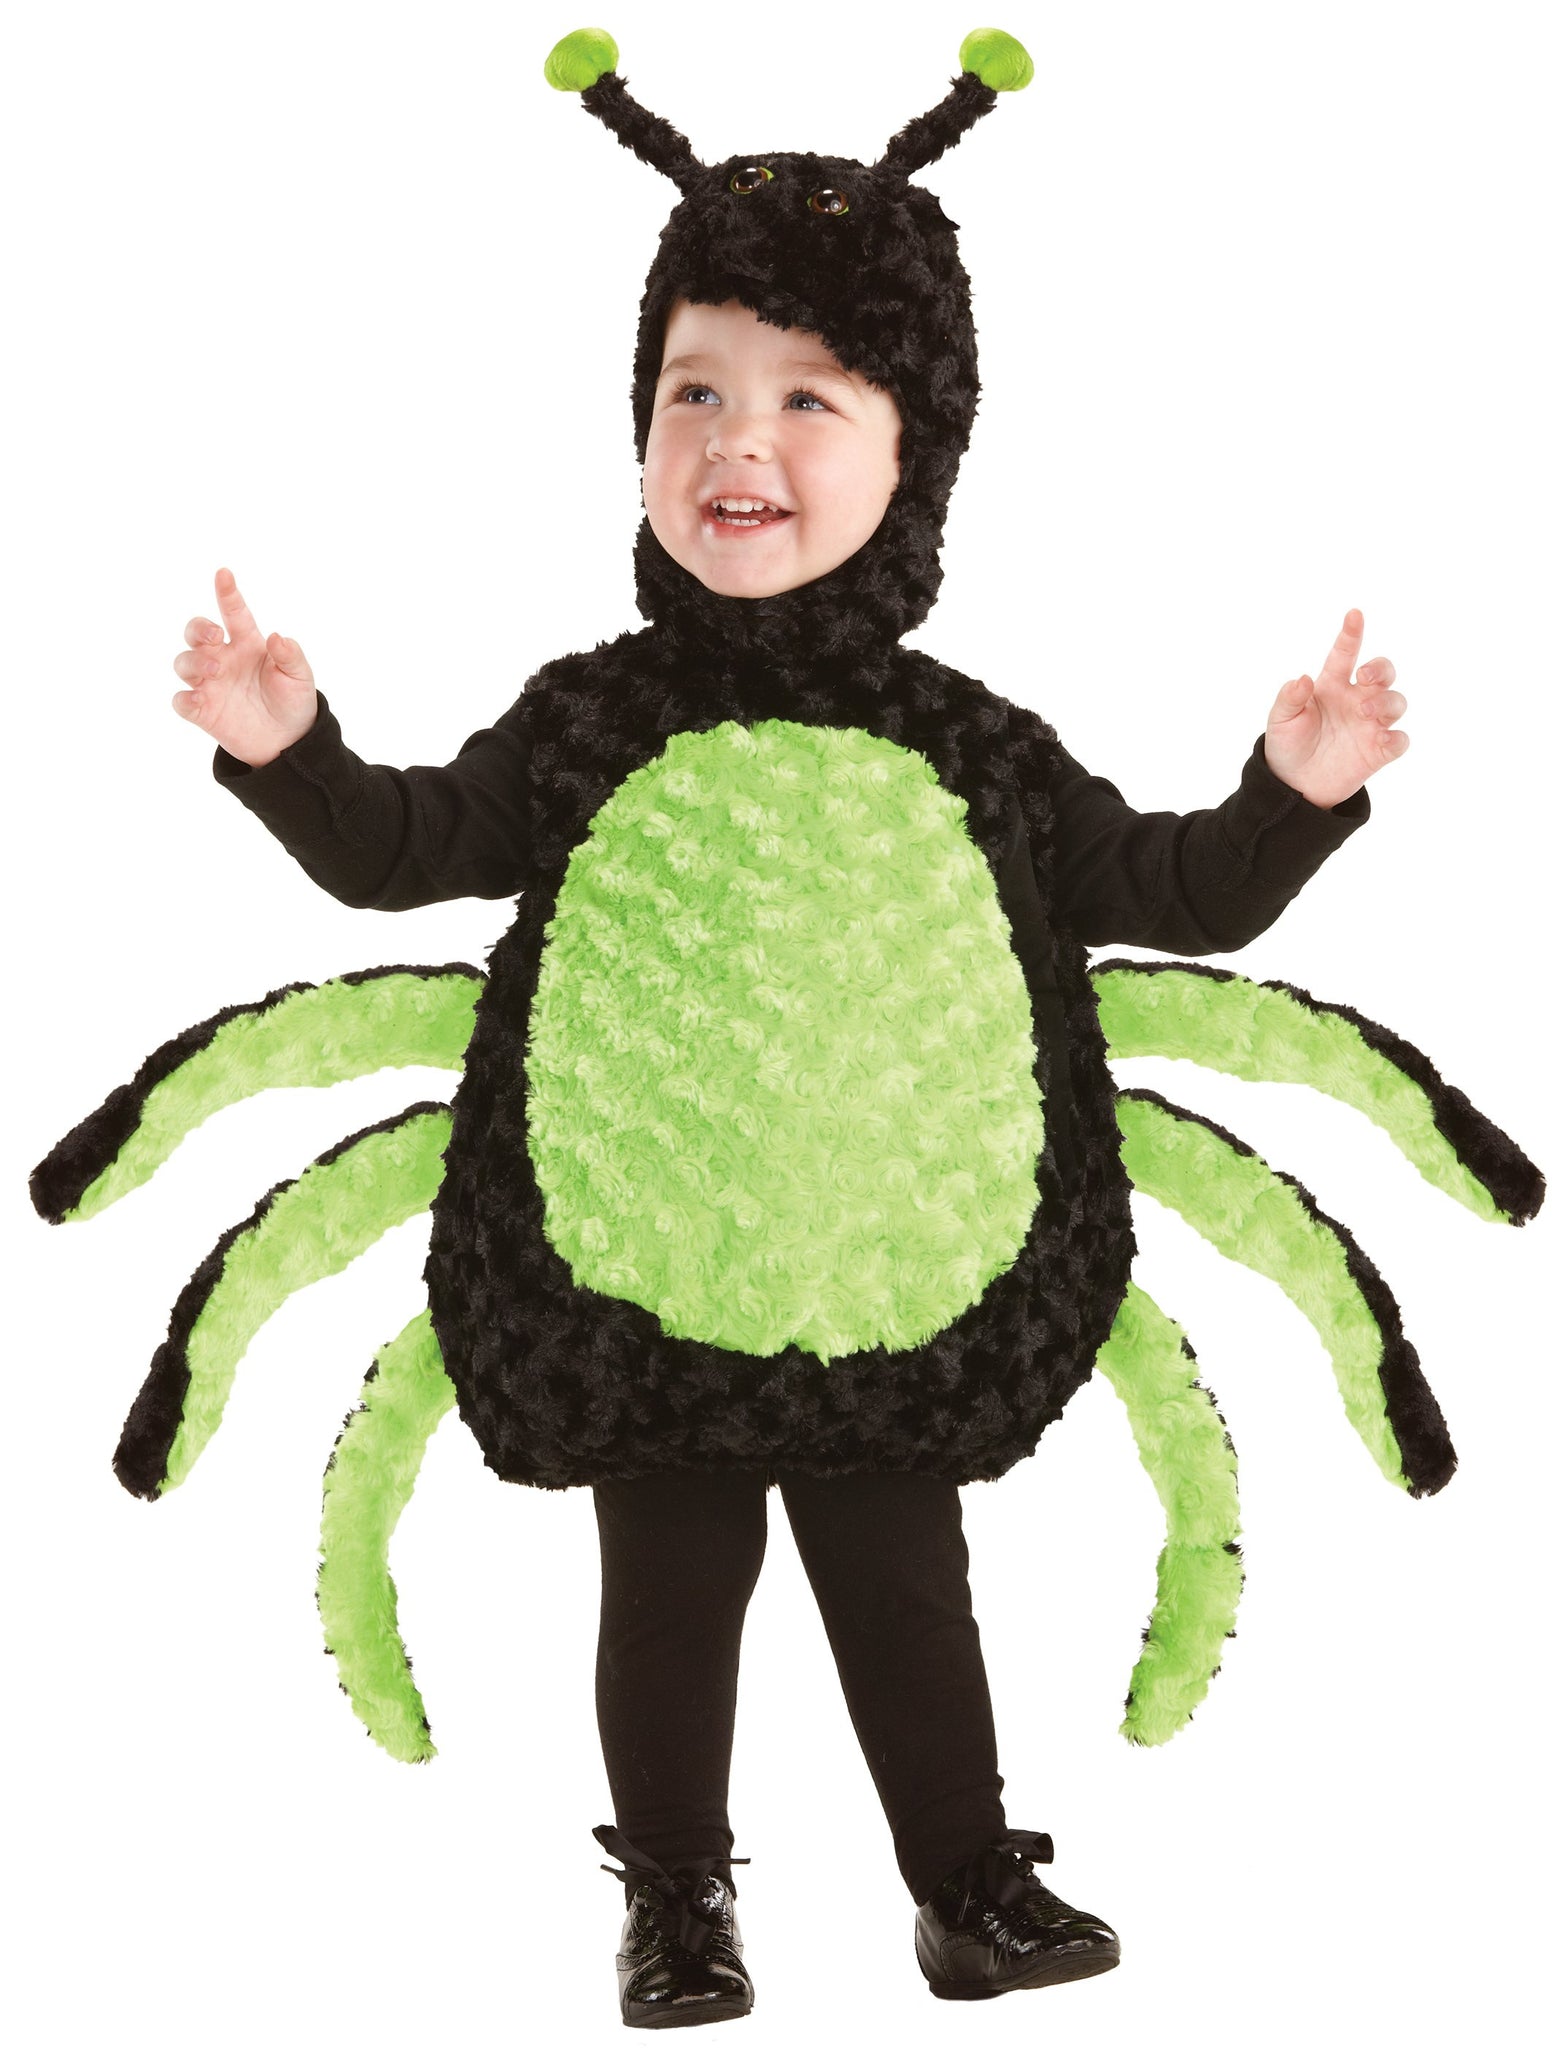 Spider hood with antennae included